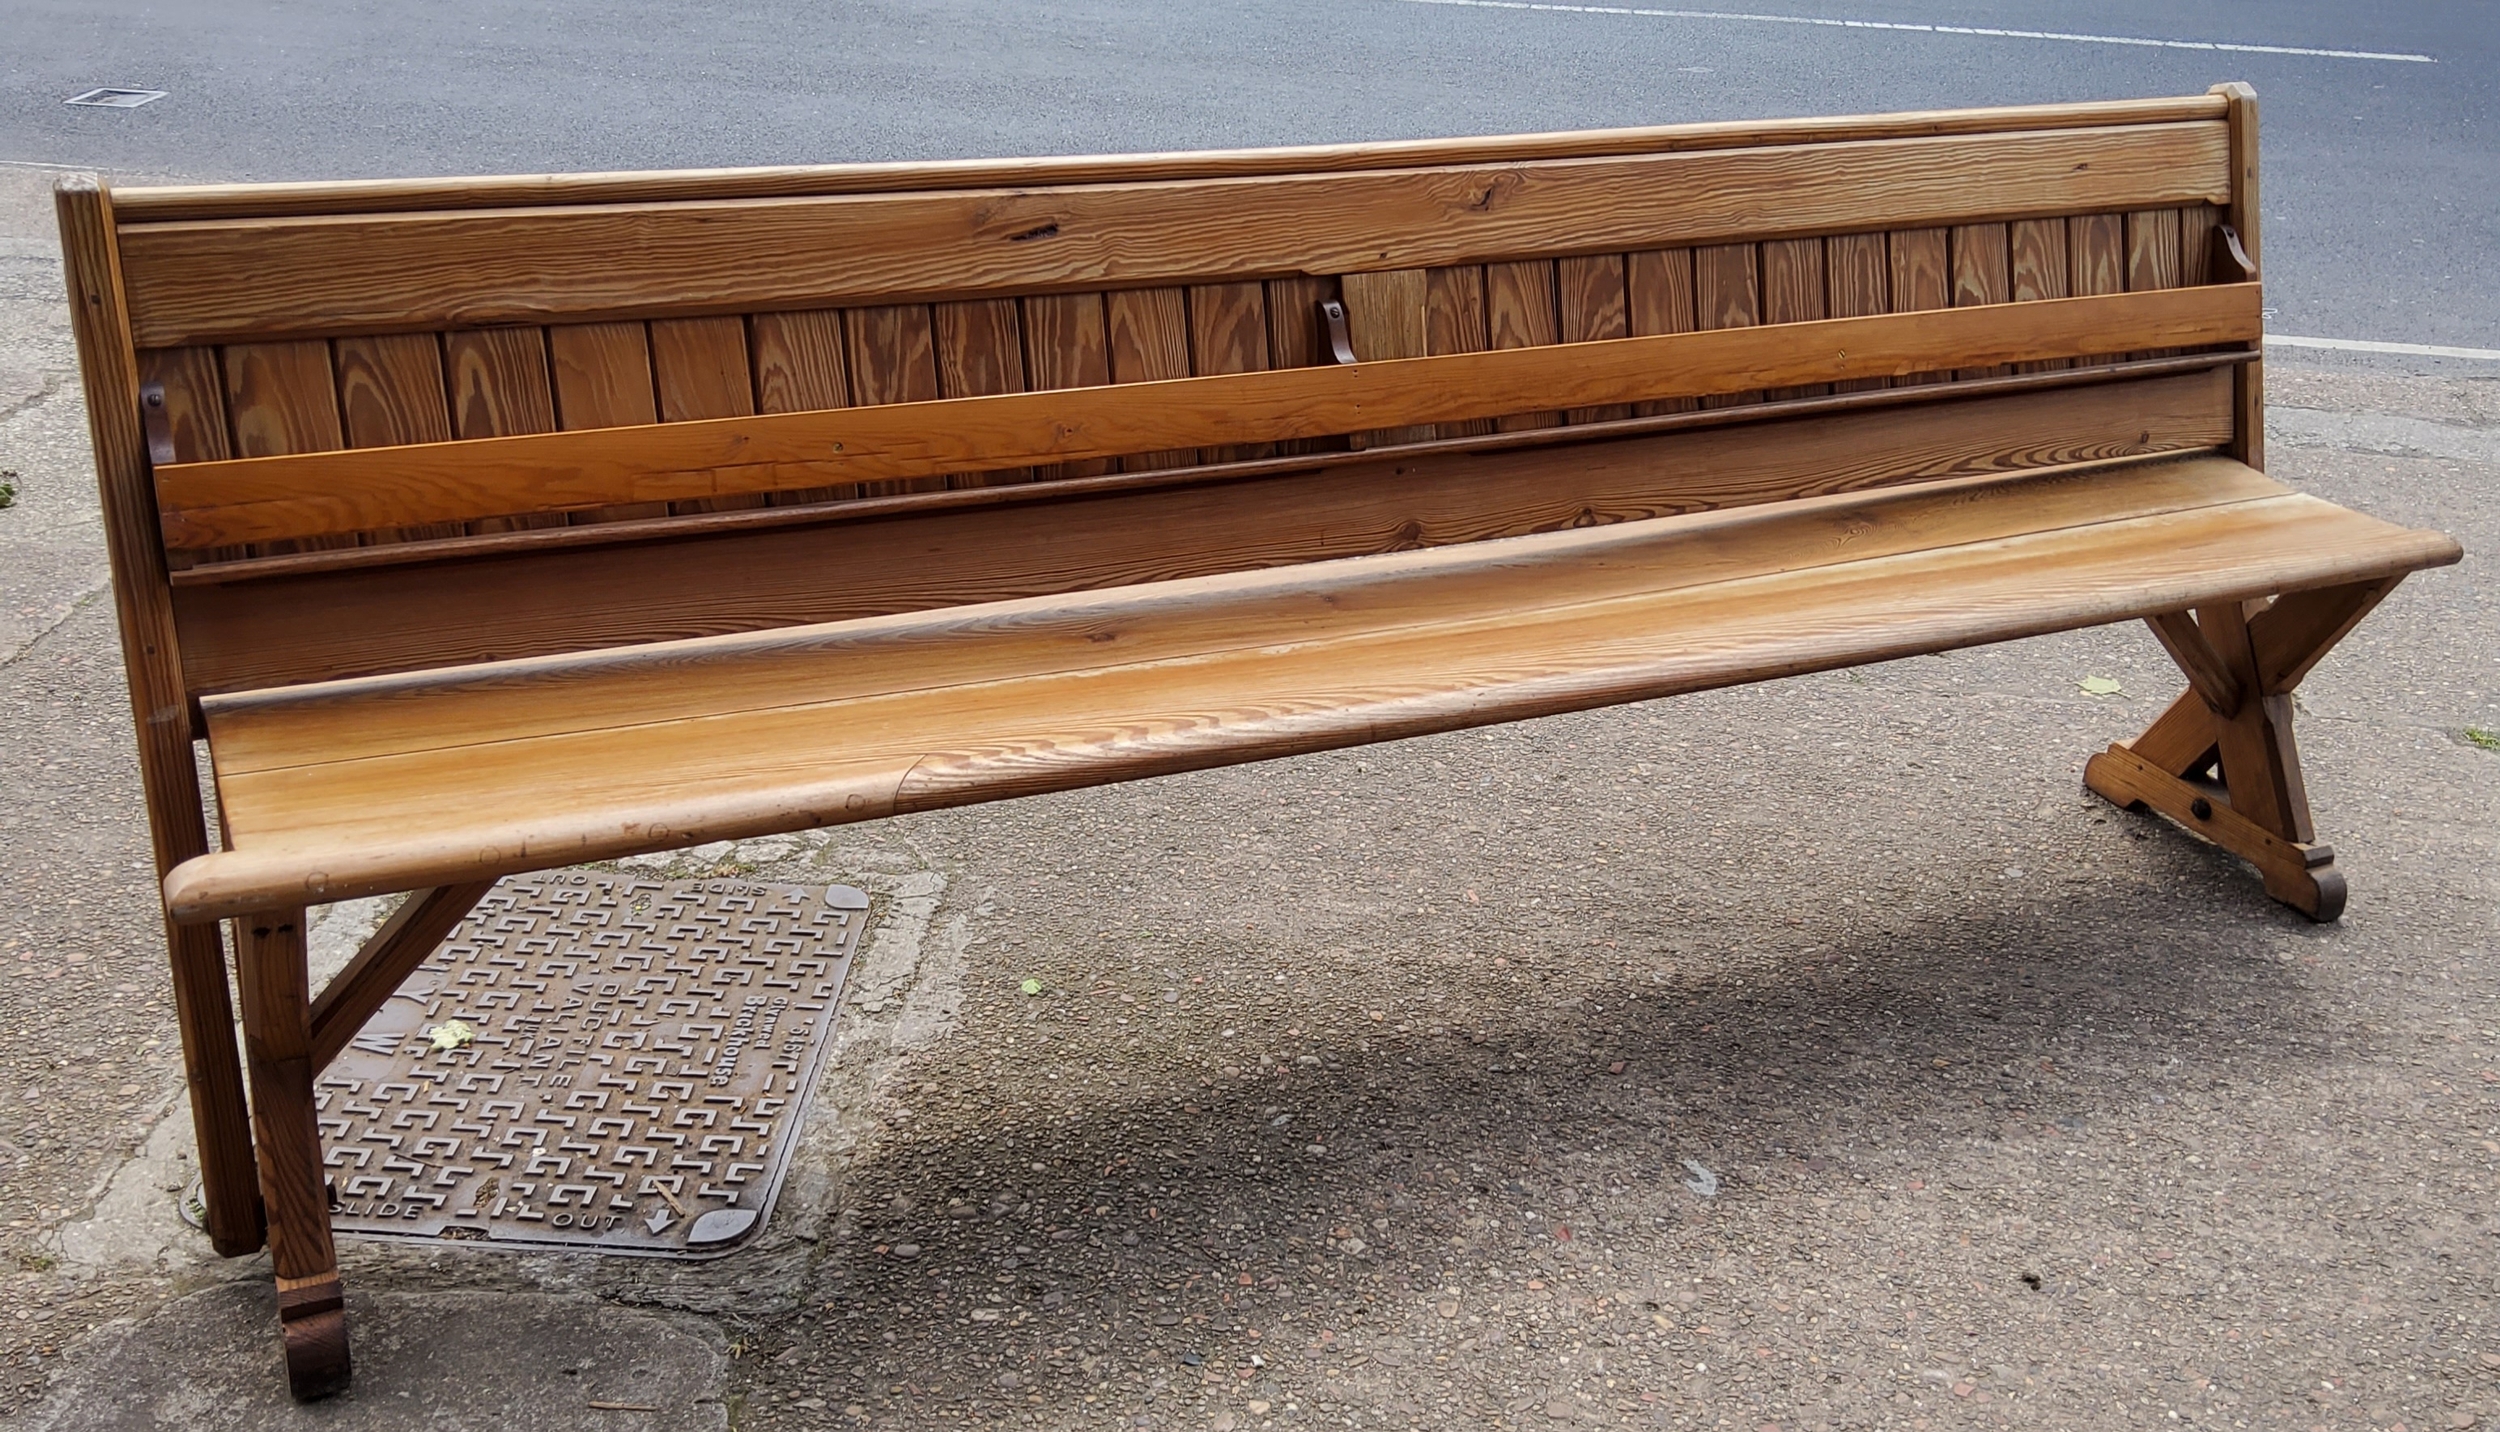 A Victorian pitch pine church pew / tram seat, slatted back, 240cm long, c,1860 - Image 3 of 5